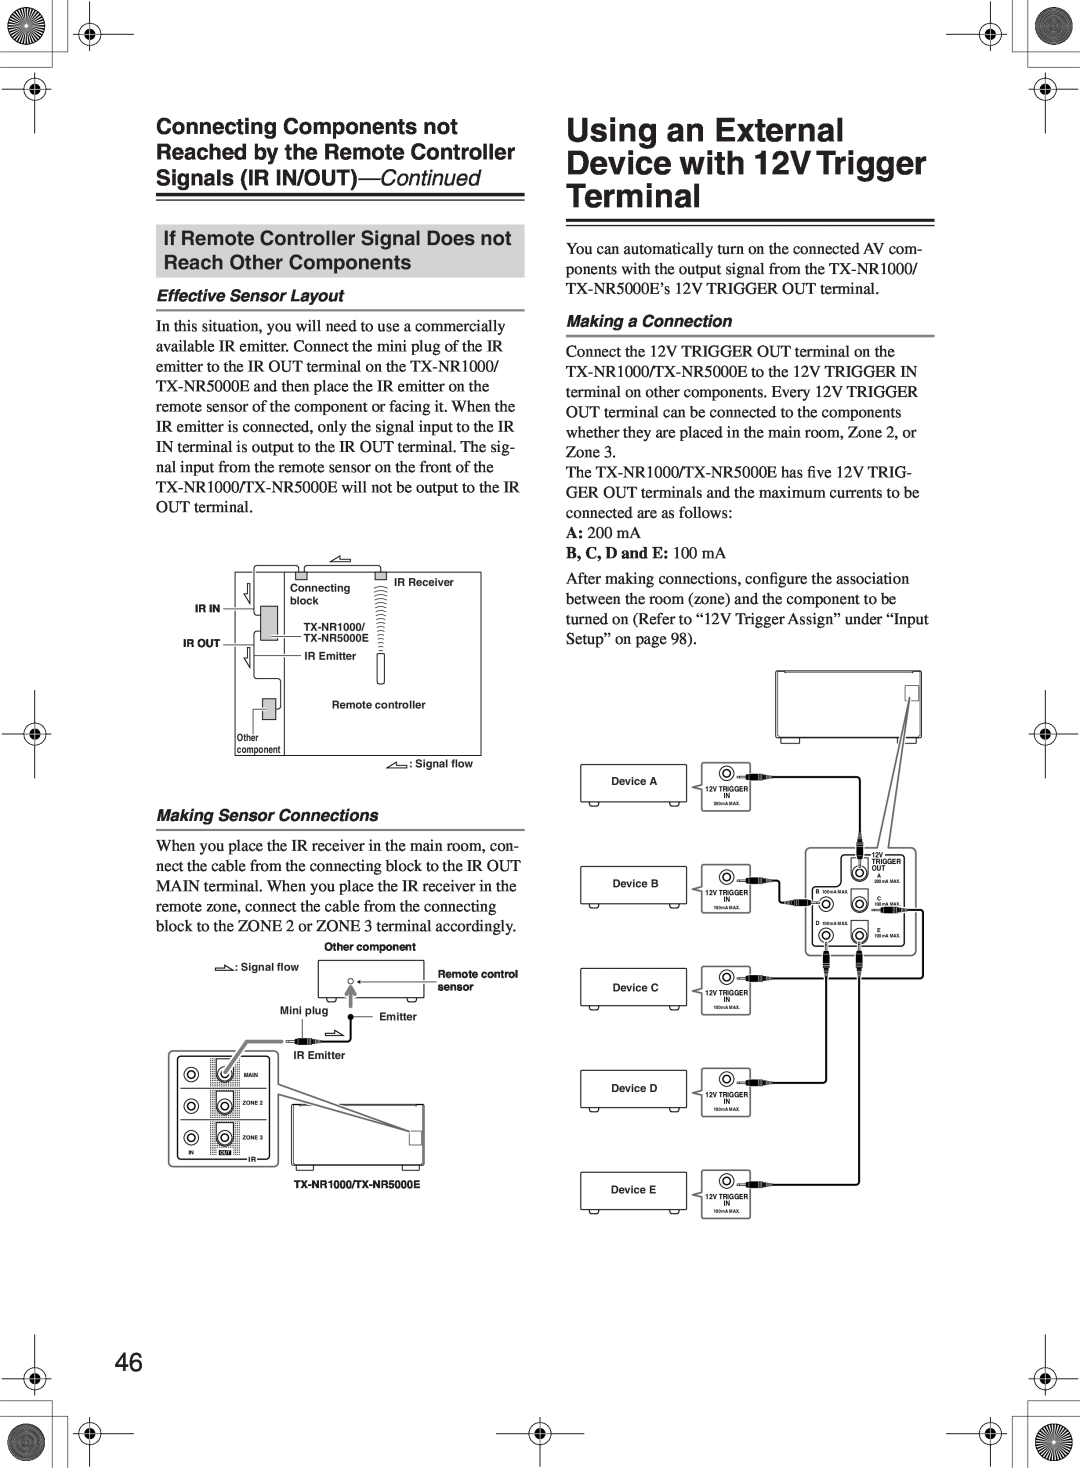 Onkyo TX-NR1000 Effective Sensor Layout, Making a Connection, B, C, D and E: 100 mA, Making Sensor Connections 